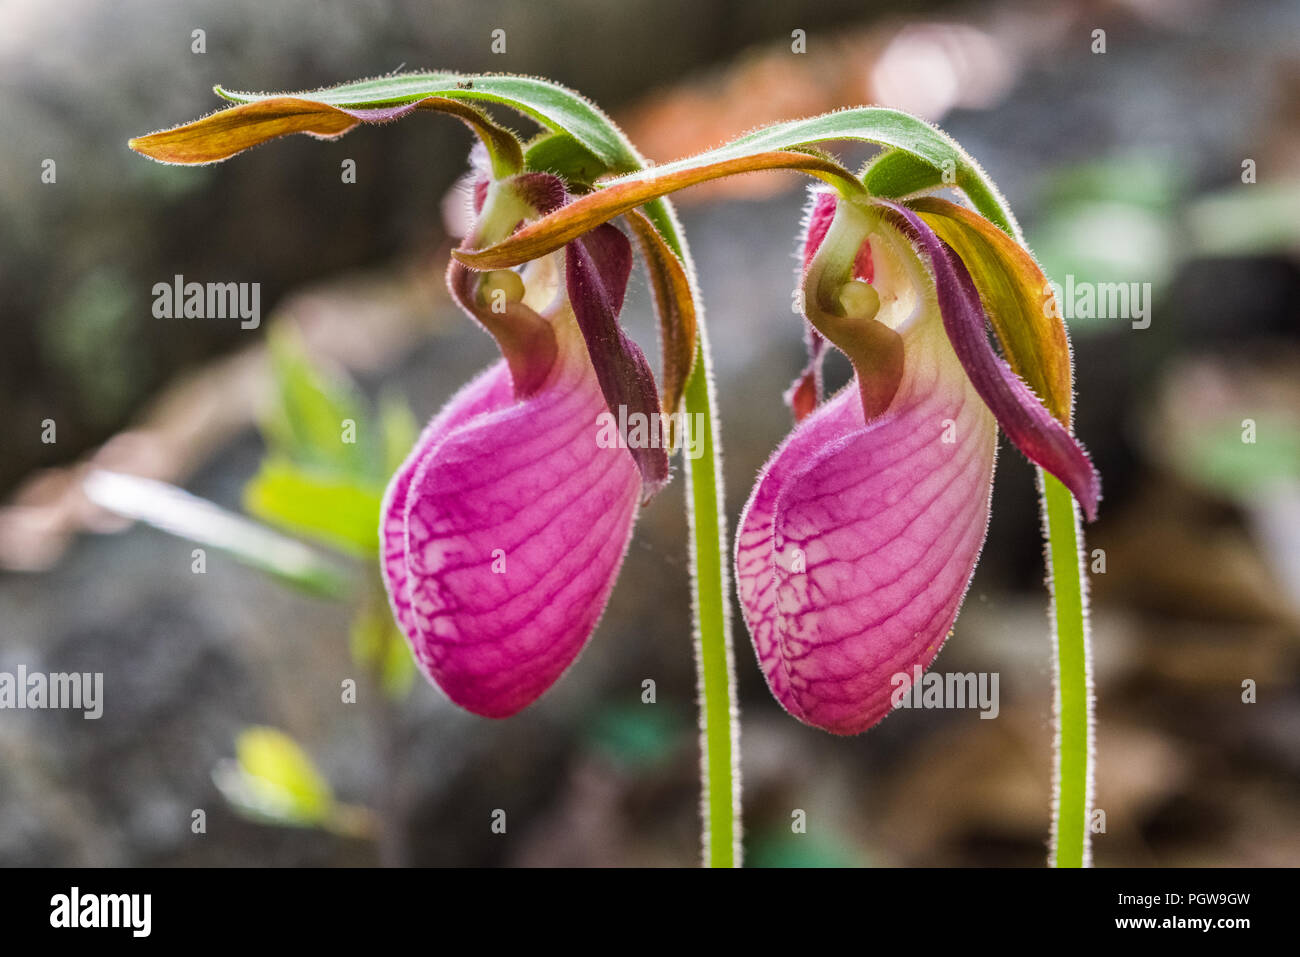 A close up shot of two pink lady's slippers, a wildflower found in the New River Gorge in West Virginia. Stock Photo